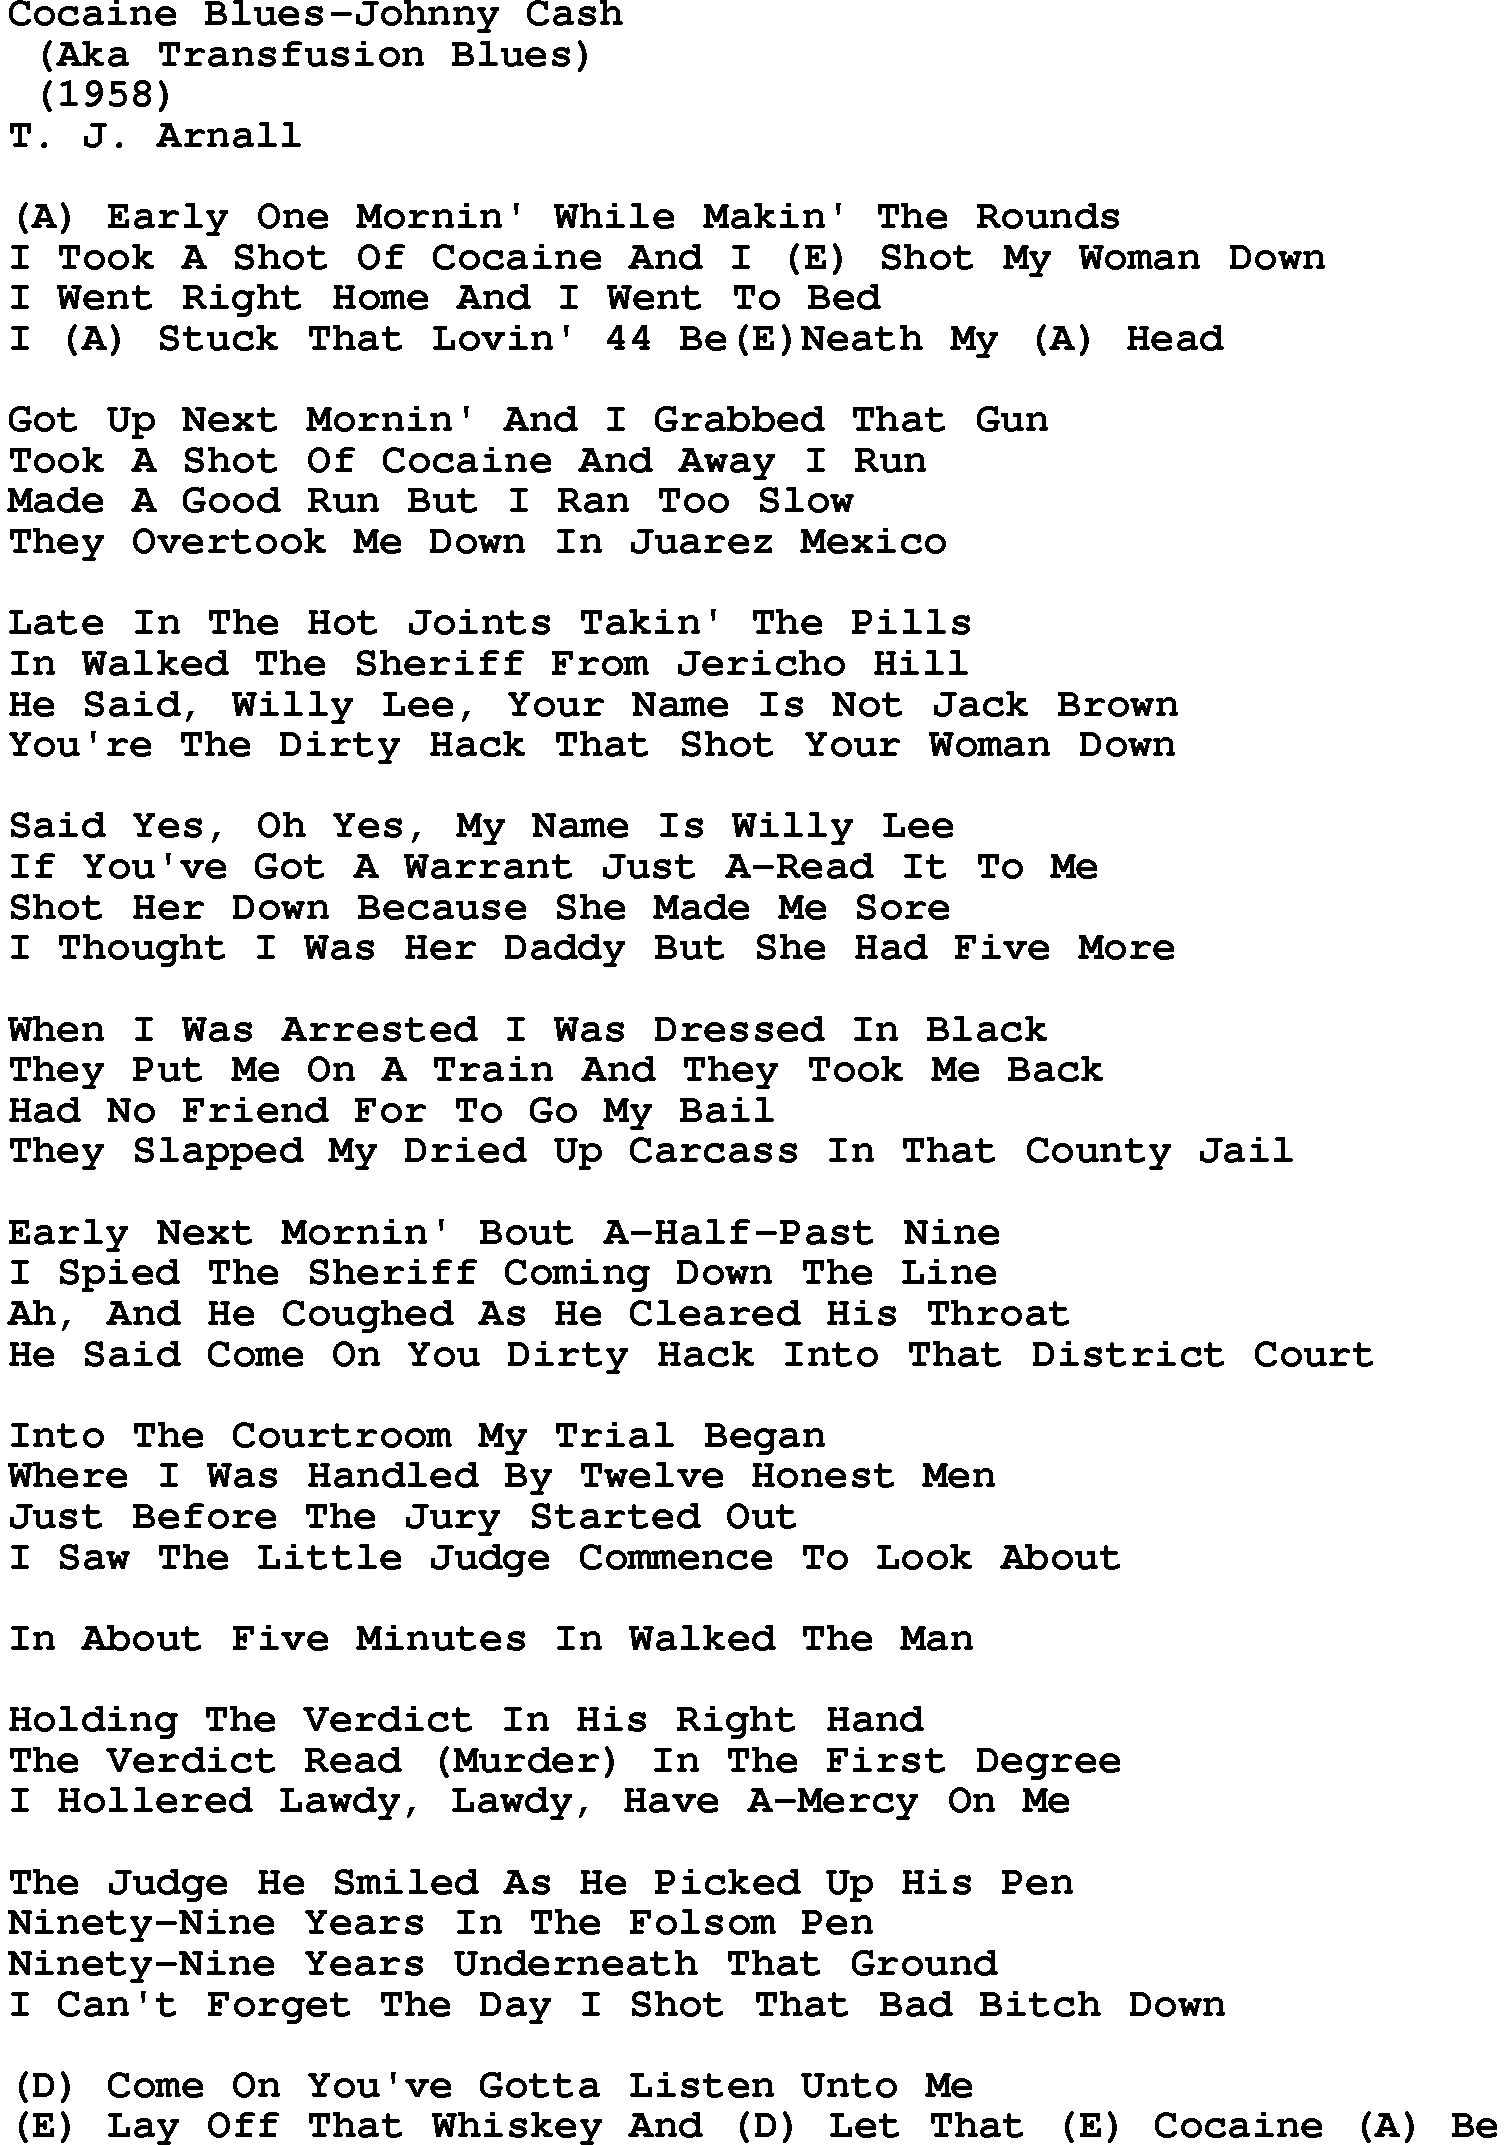 Country music song: Cocaine Blues-Johnny Cash lyrics and chords